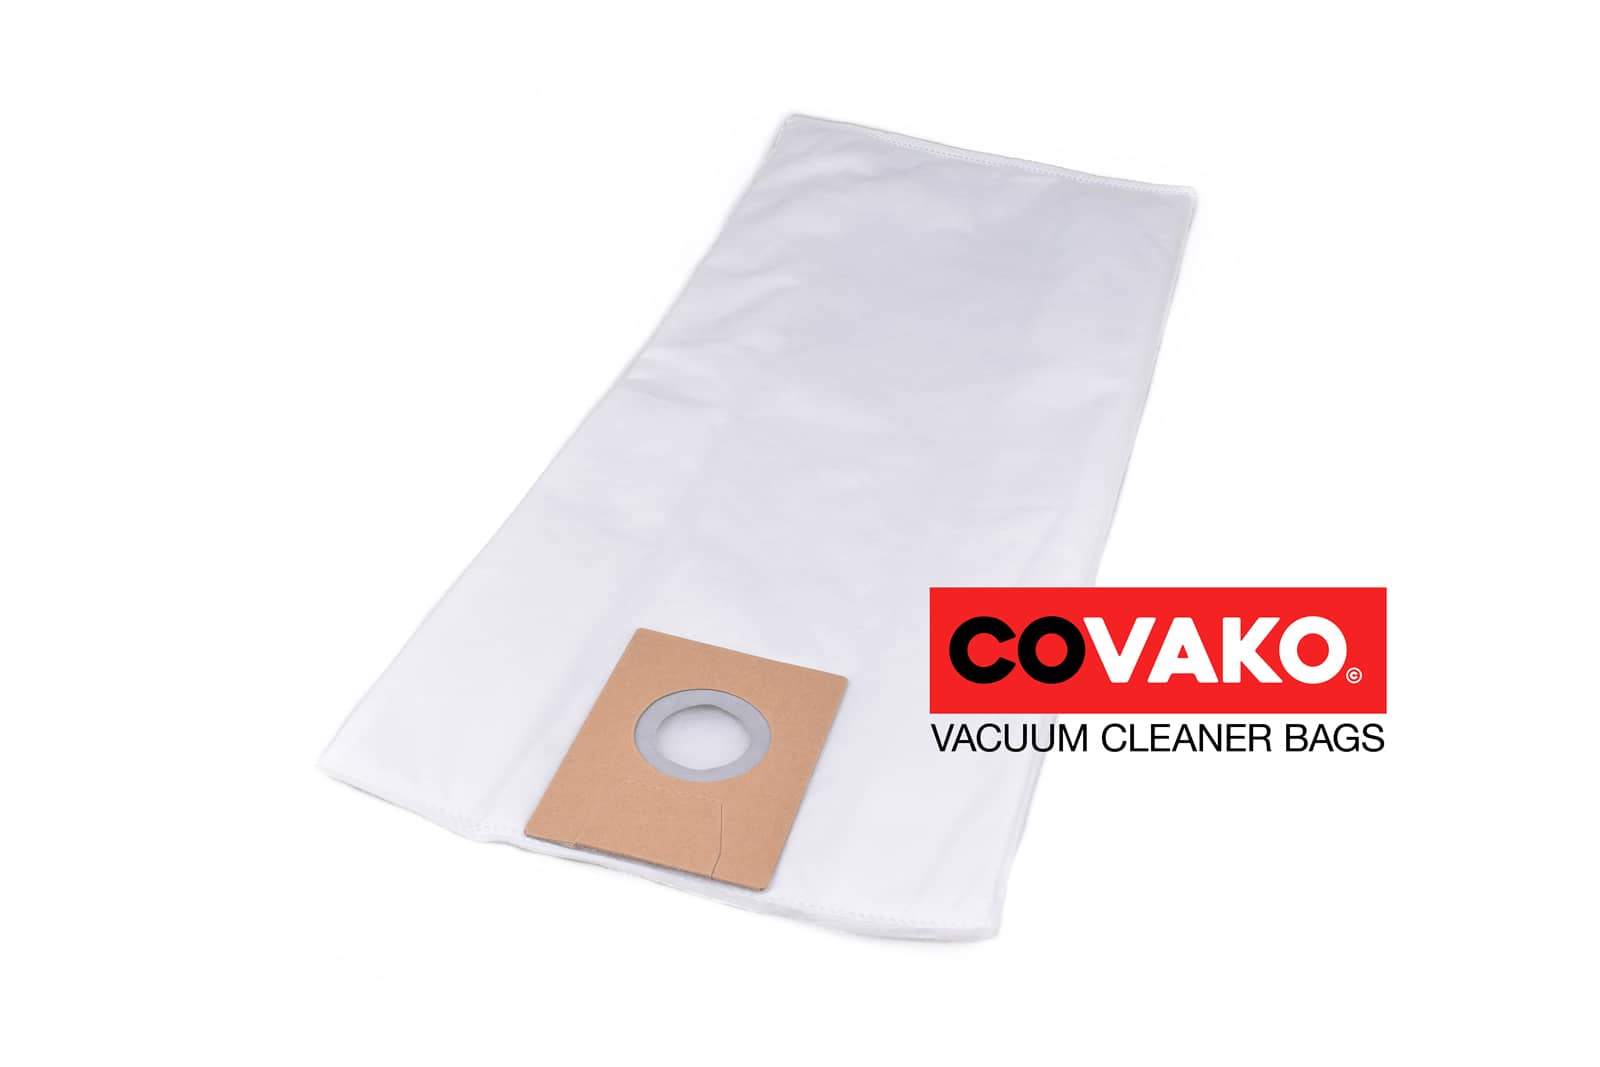 Hevo BF 575 / Synthesis - Hevo vacuum cleaner bags